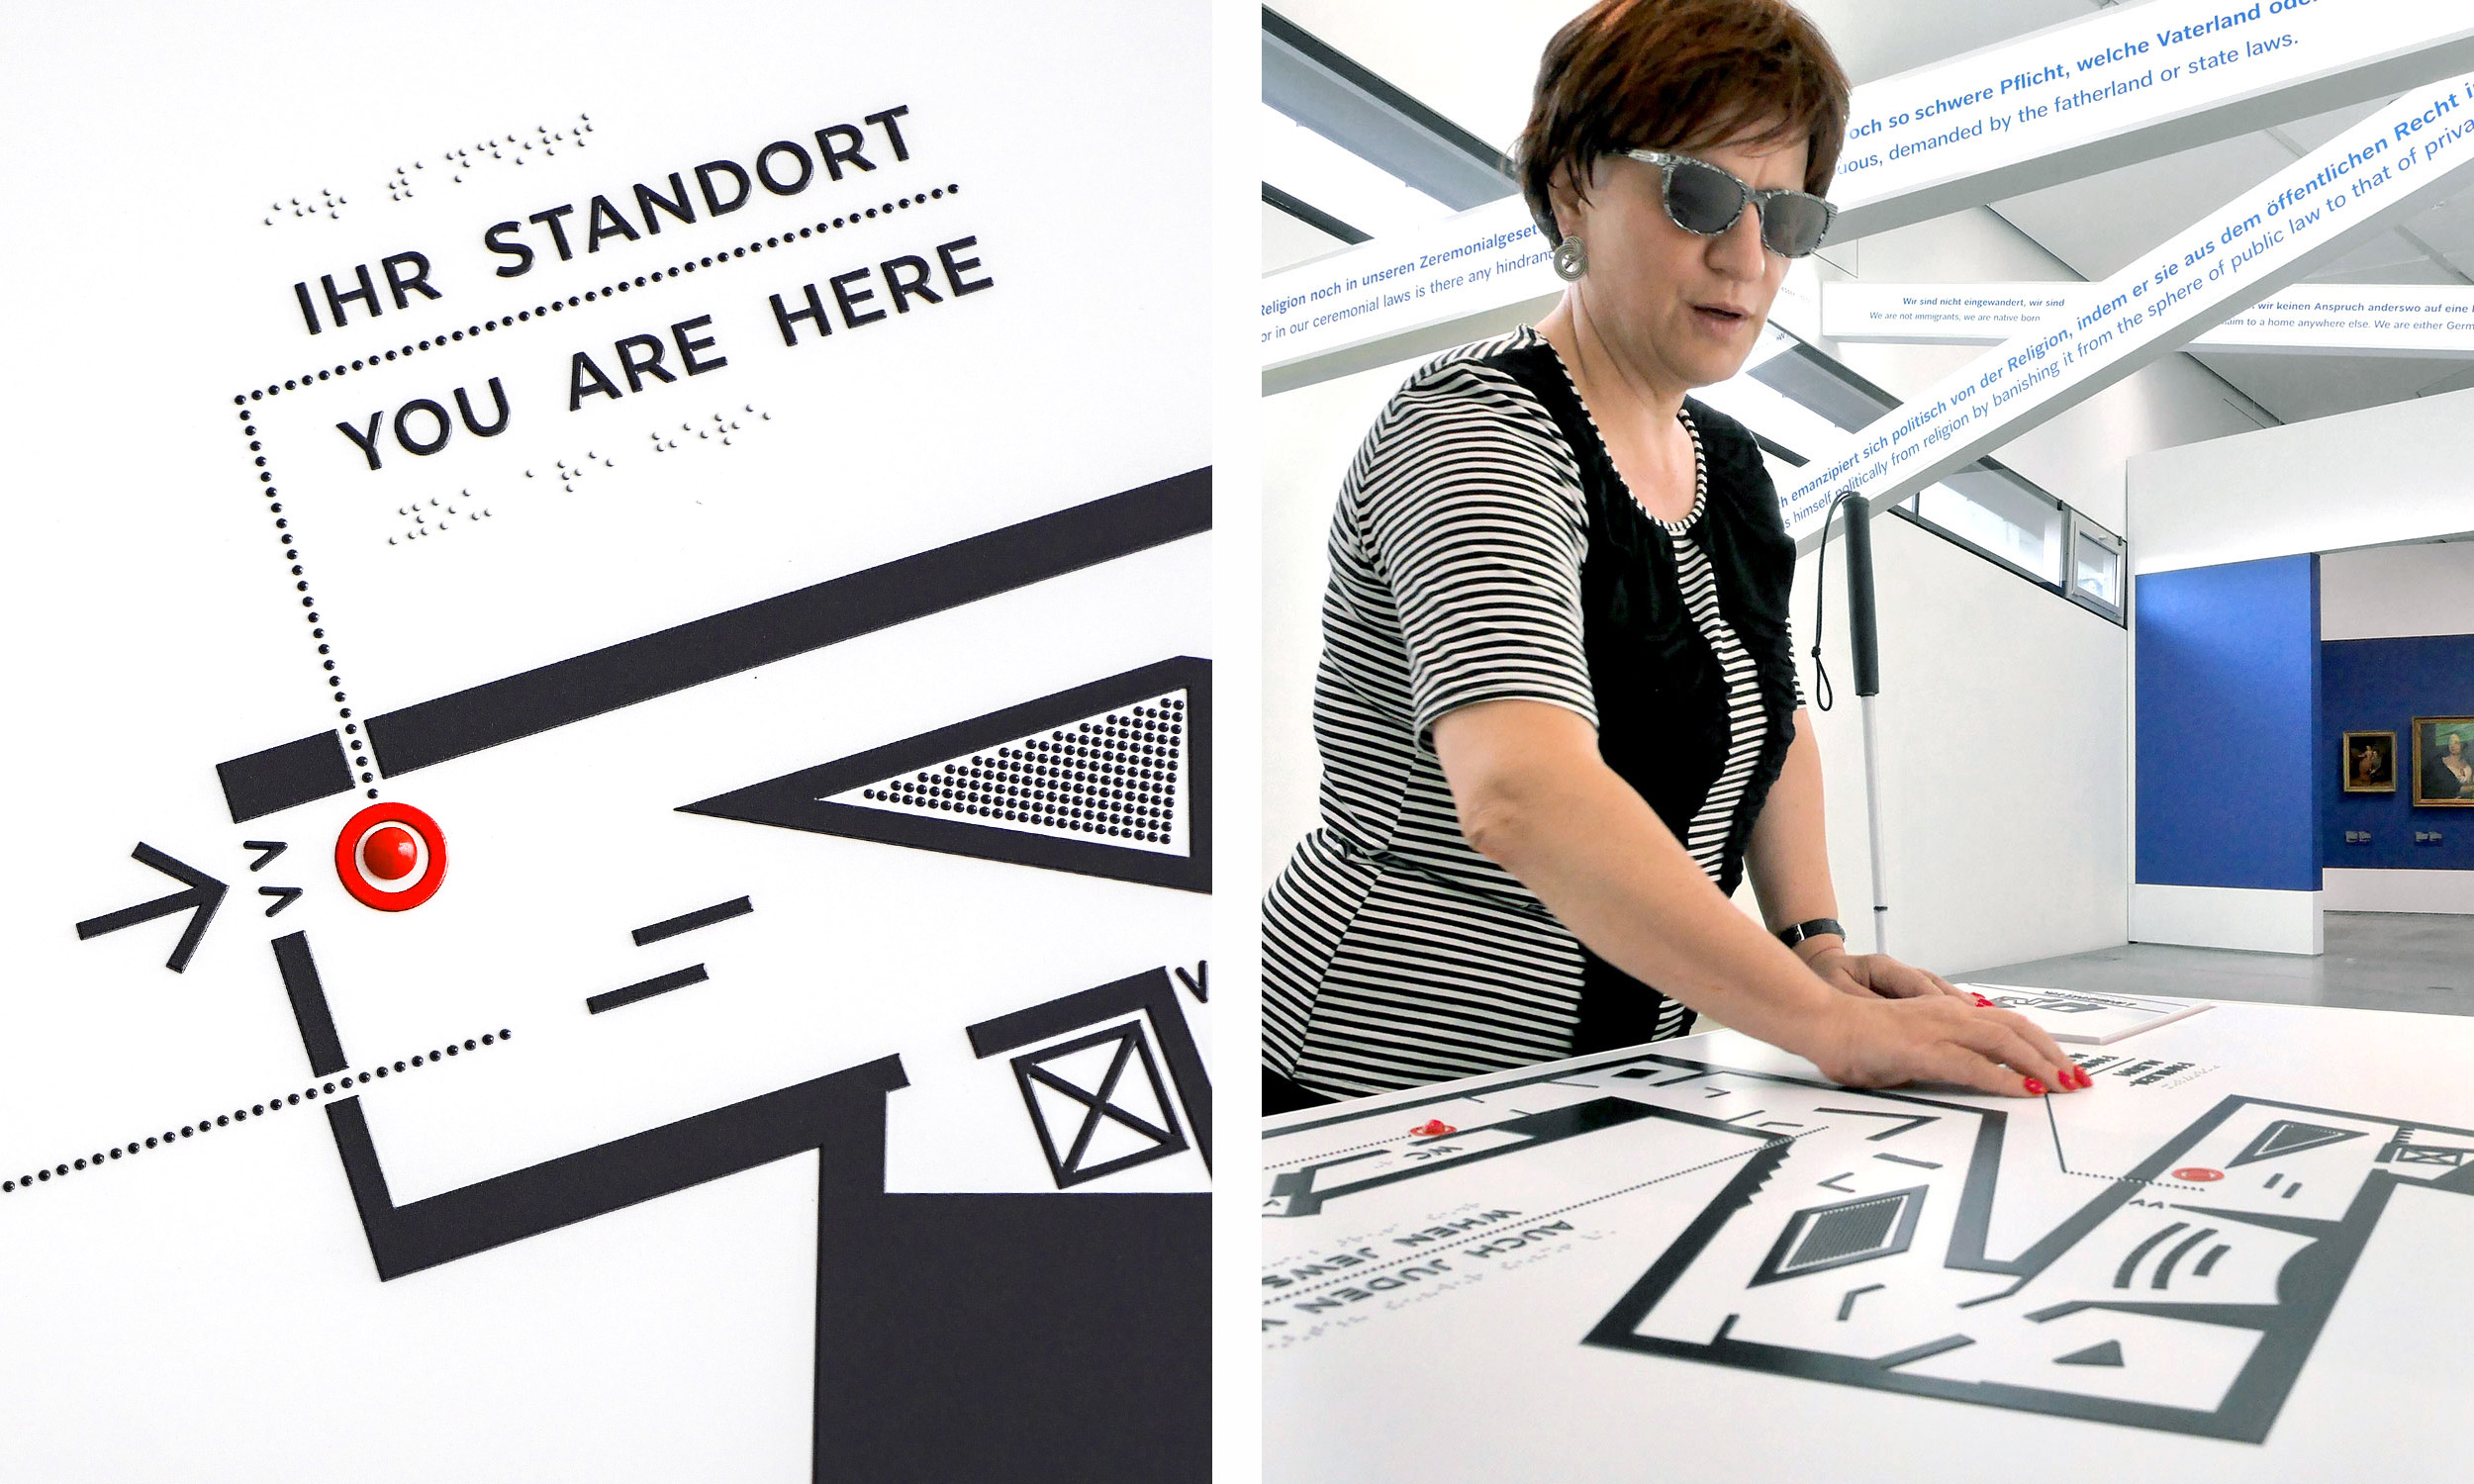 Two photos of the tactile map for orientation in the Jewish Museum in Berlin. The right photo shows a detailed view of the tactile map with its own location marked. The right photo shows a woman feeling the plan for orientation in the museum building. In the background, at the top of the ceiling, white struts can be seen from wall to wall with blue lettering on a white background.